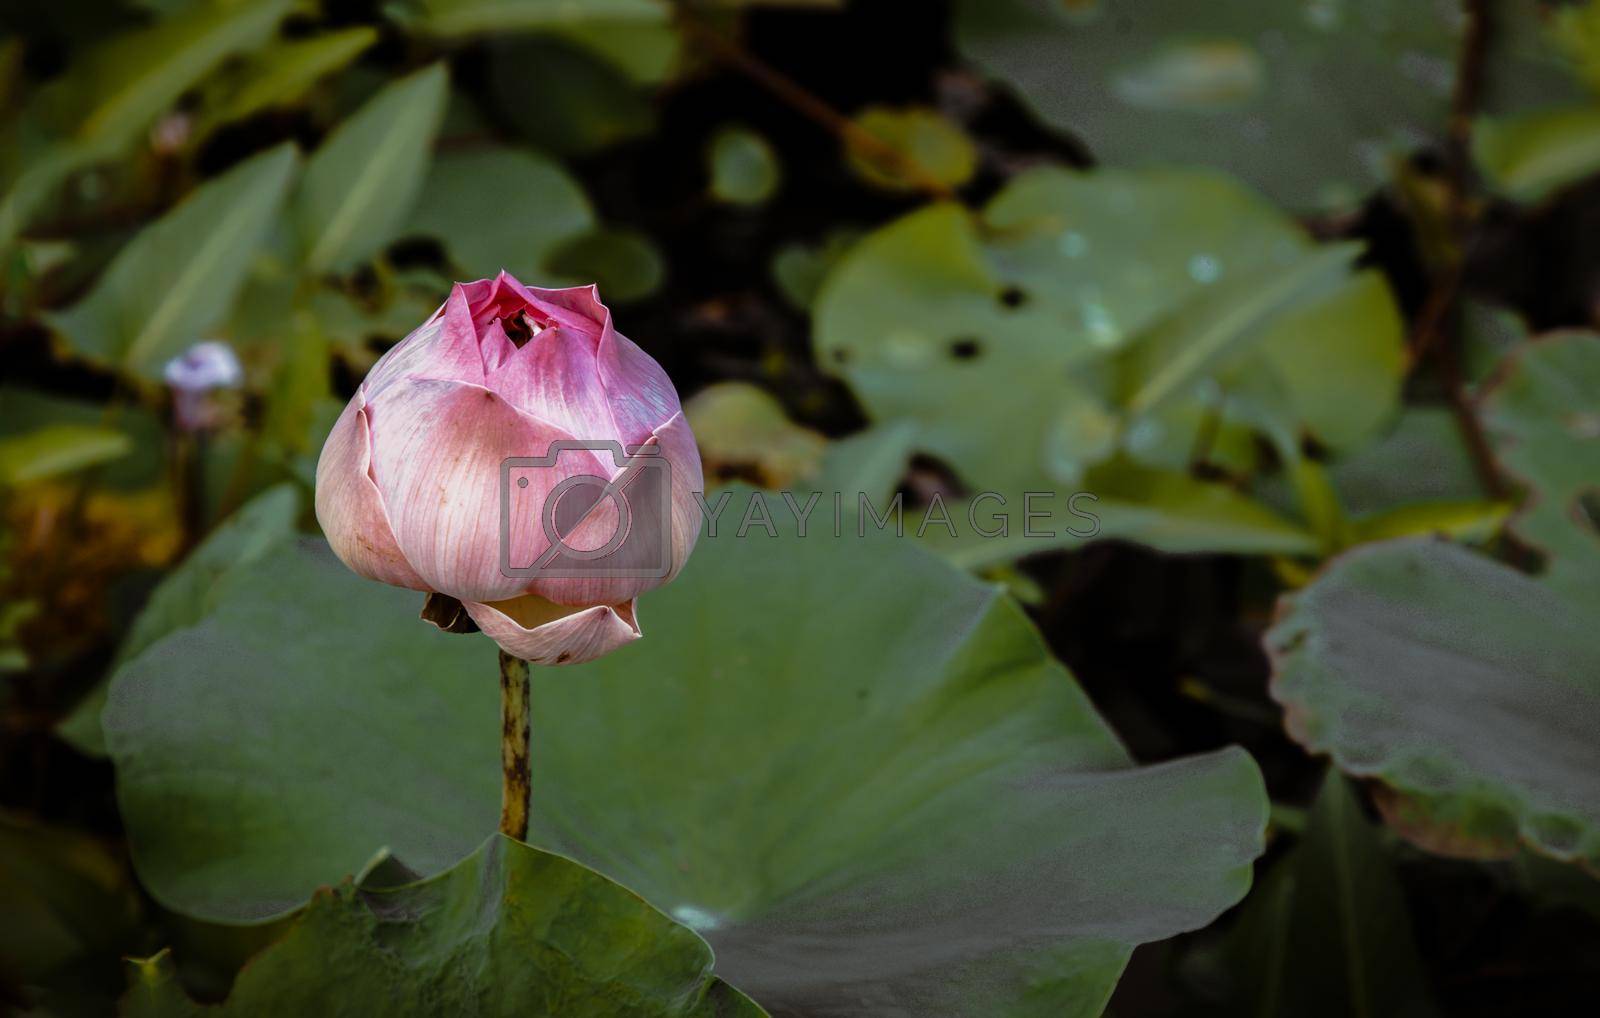 Bud of Pink fancy waterlily or lotus flower in pond with green water lily leaves background. A lotus flower in early puberty, Lotus is logo of spa and buddhism in asia, Copy space. Selective focus.